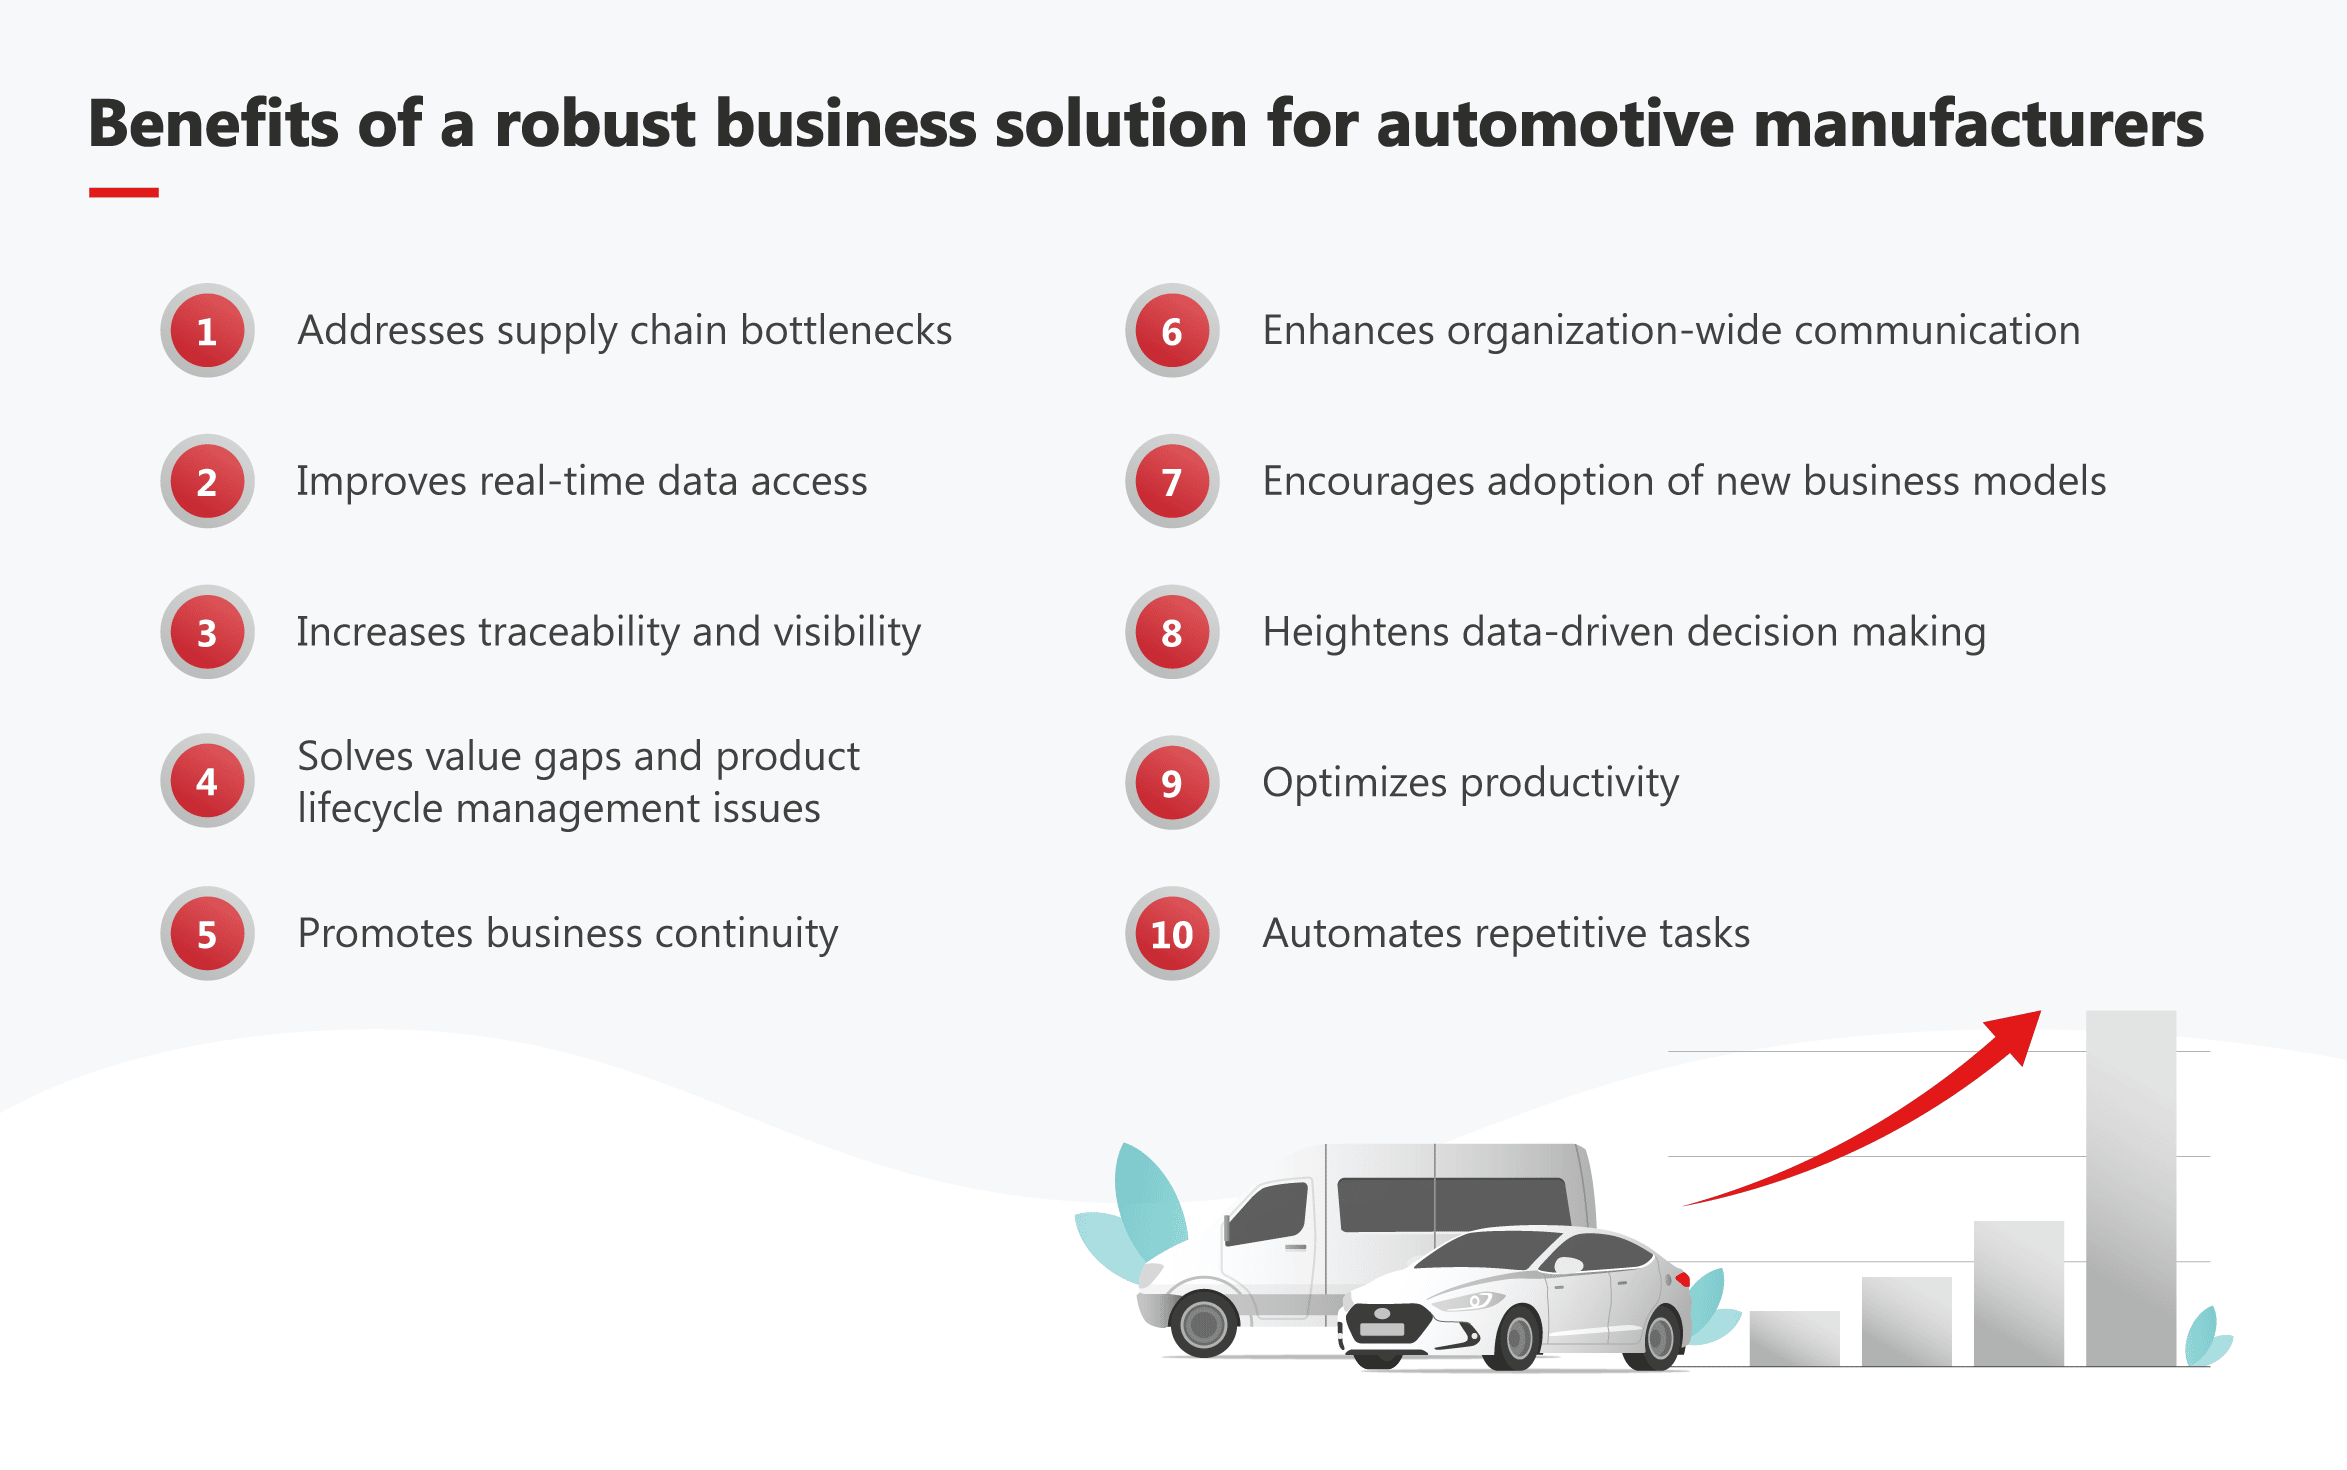 Benefits of a robust business solution for automotive manufacturers